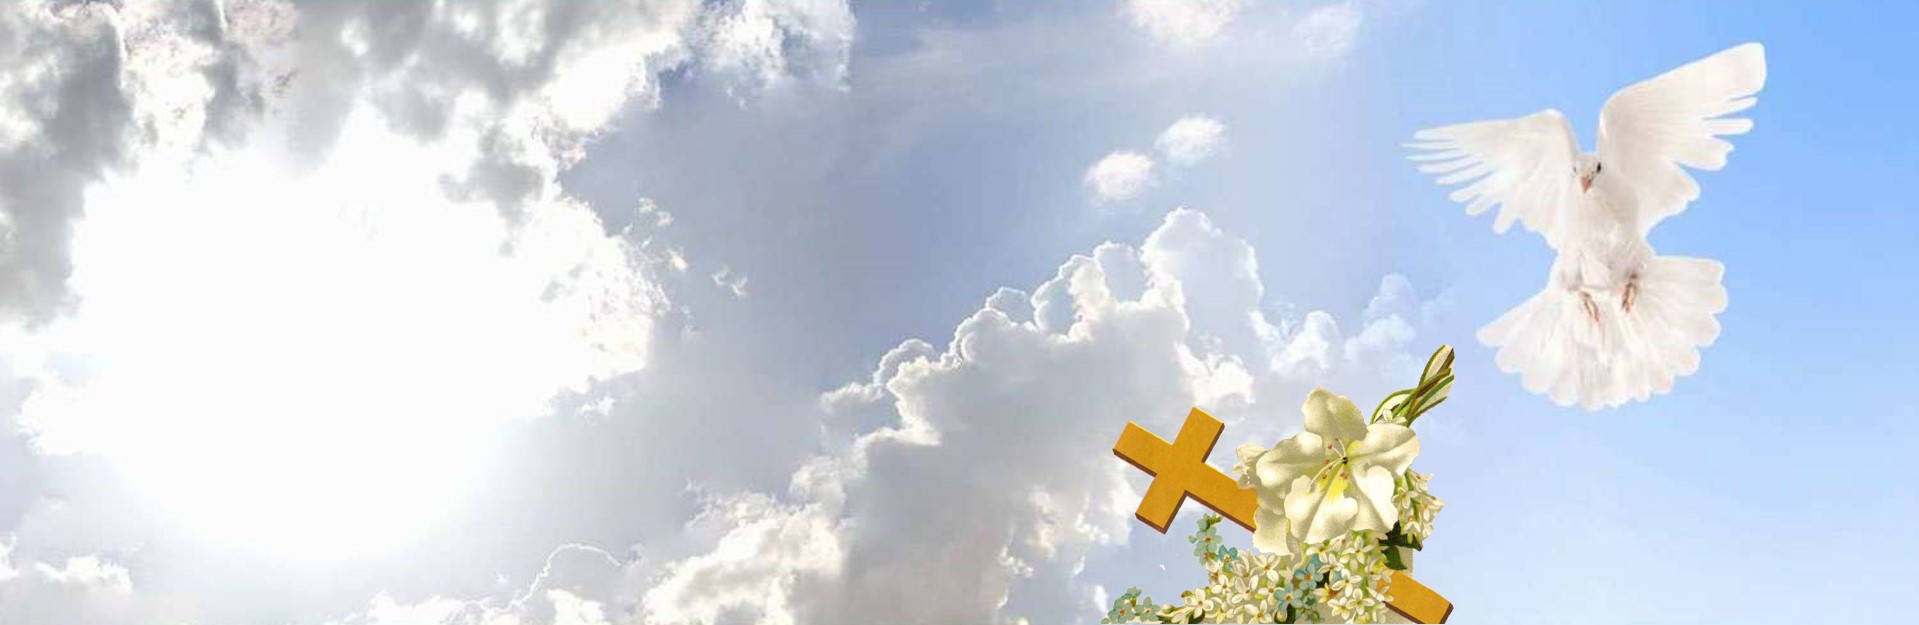 Christian Funeral Clouds Background